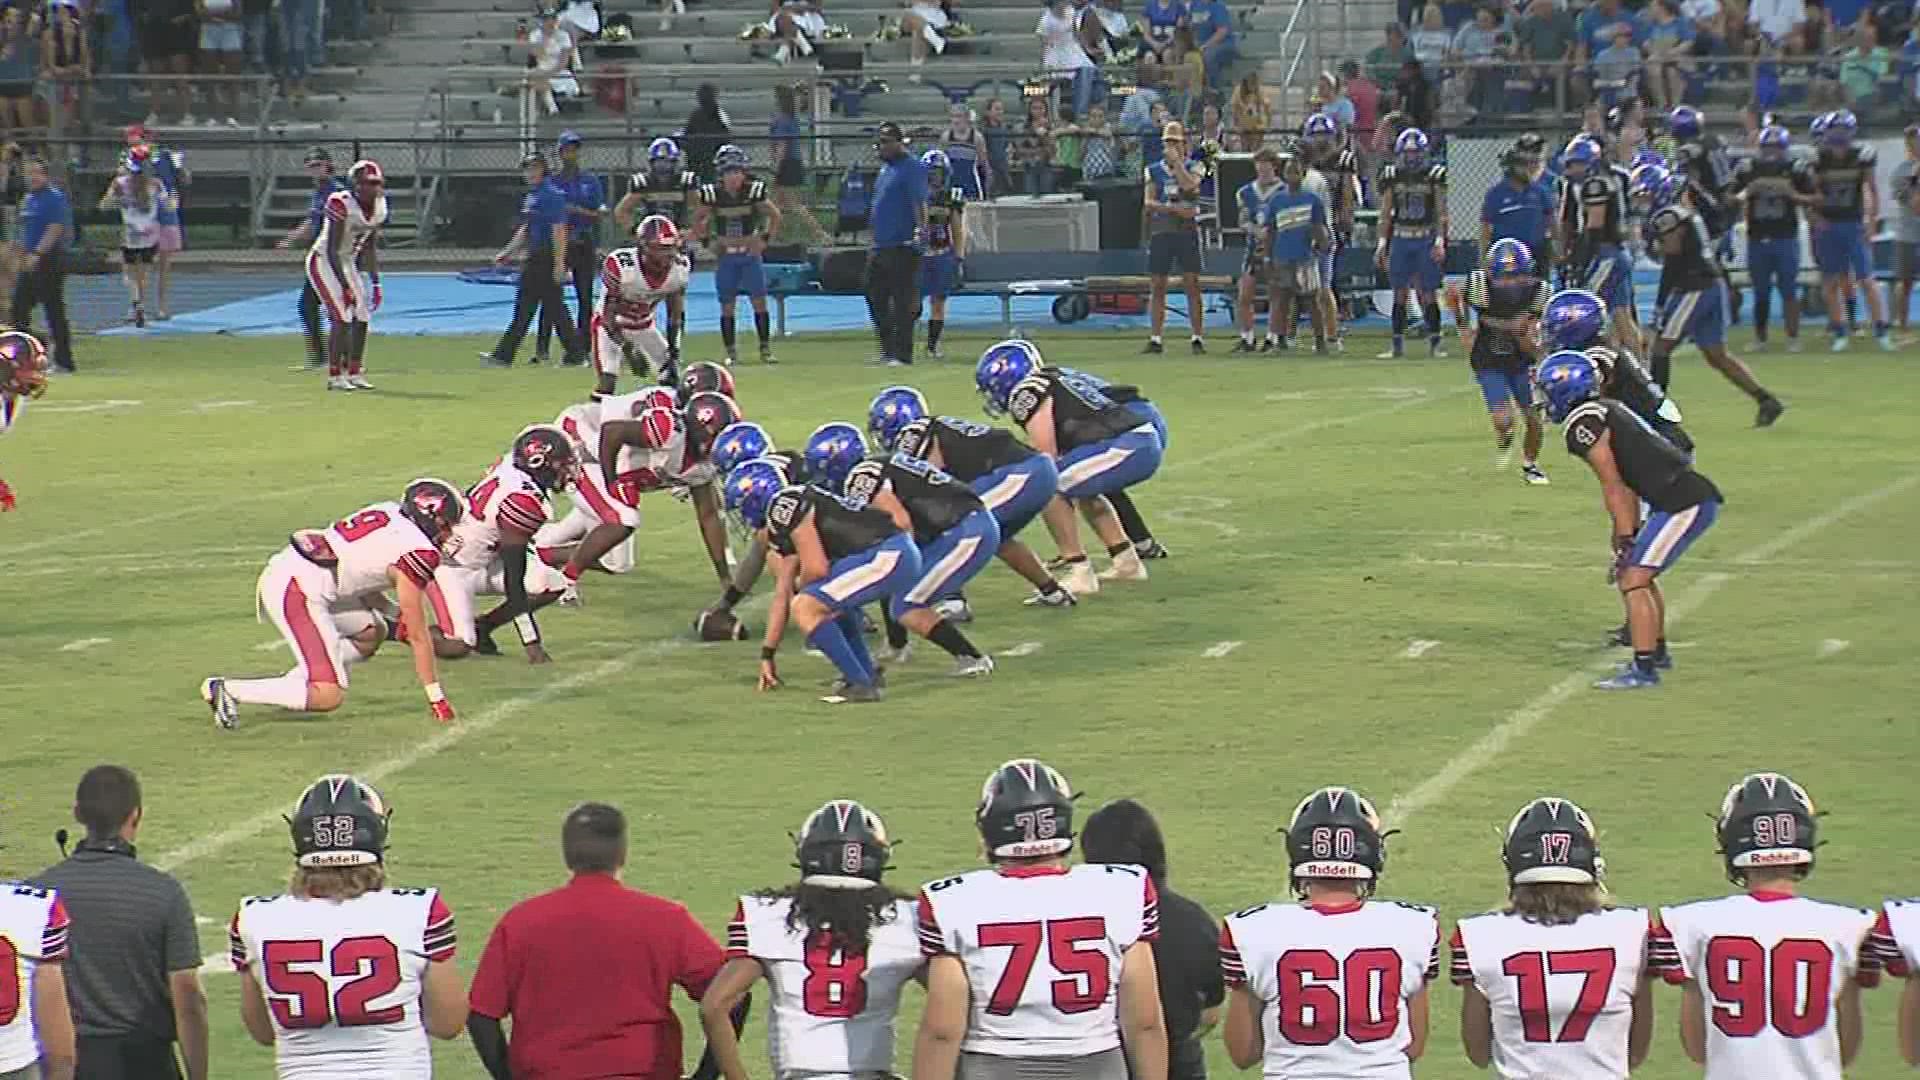 Hamshire-Fannett is heating up just at the right time